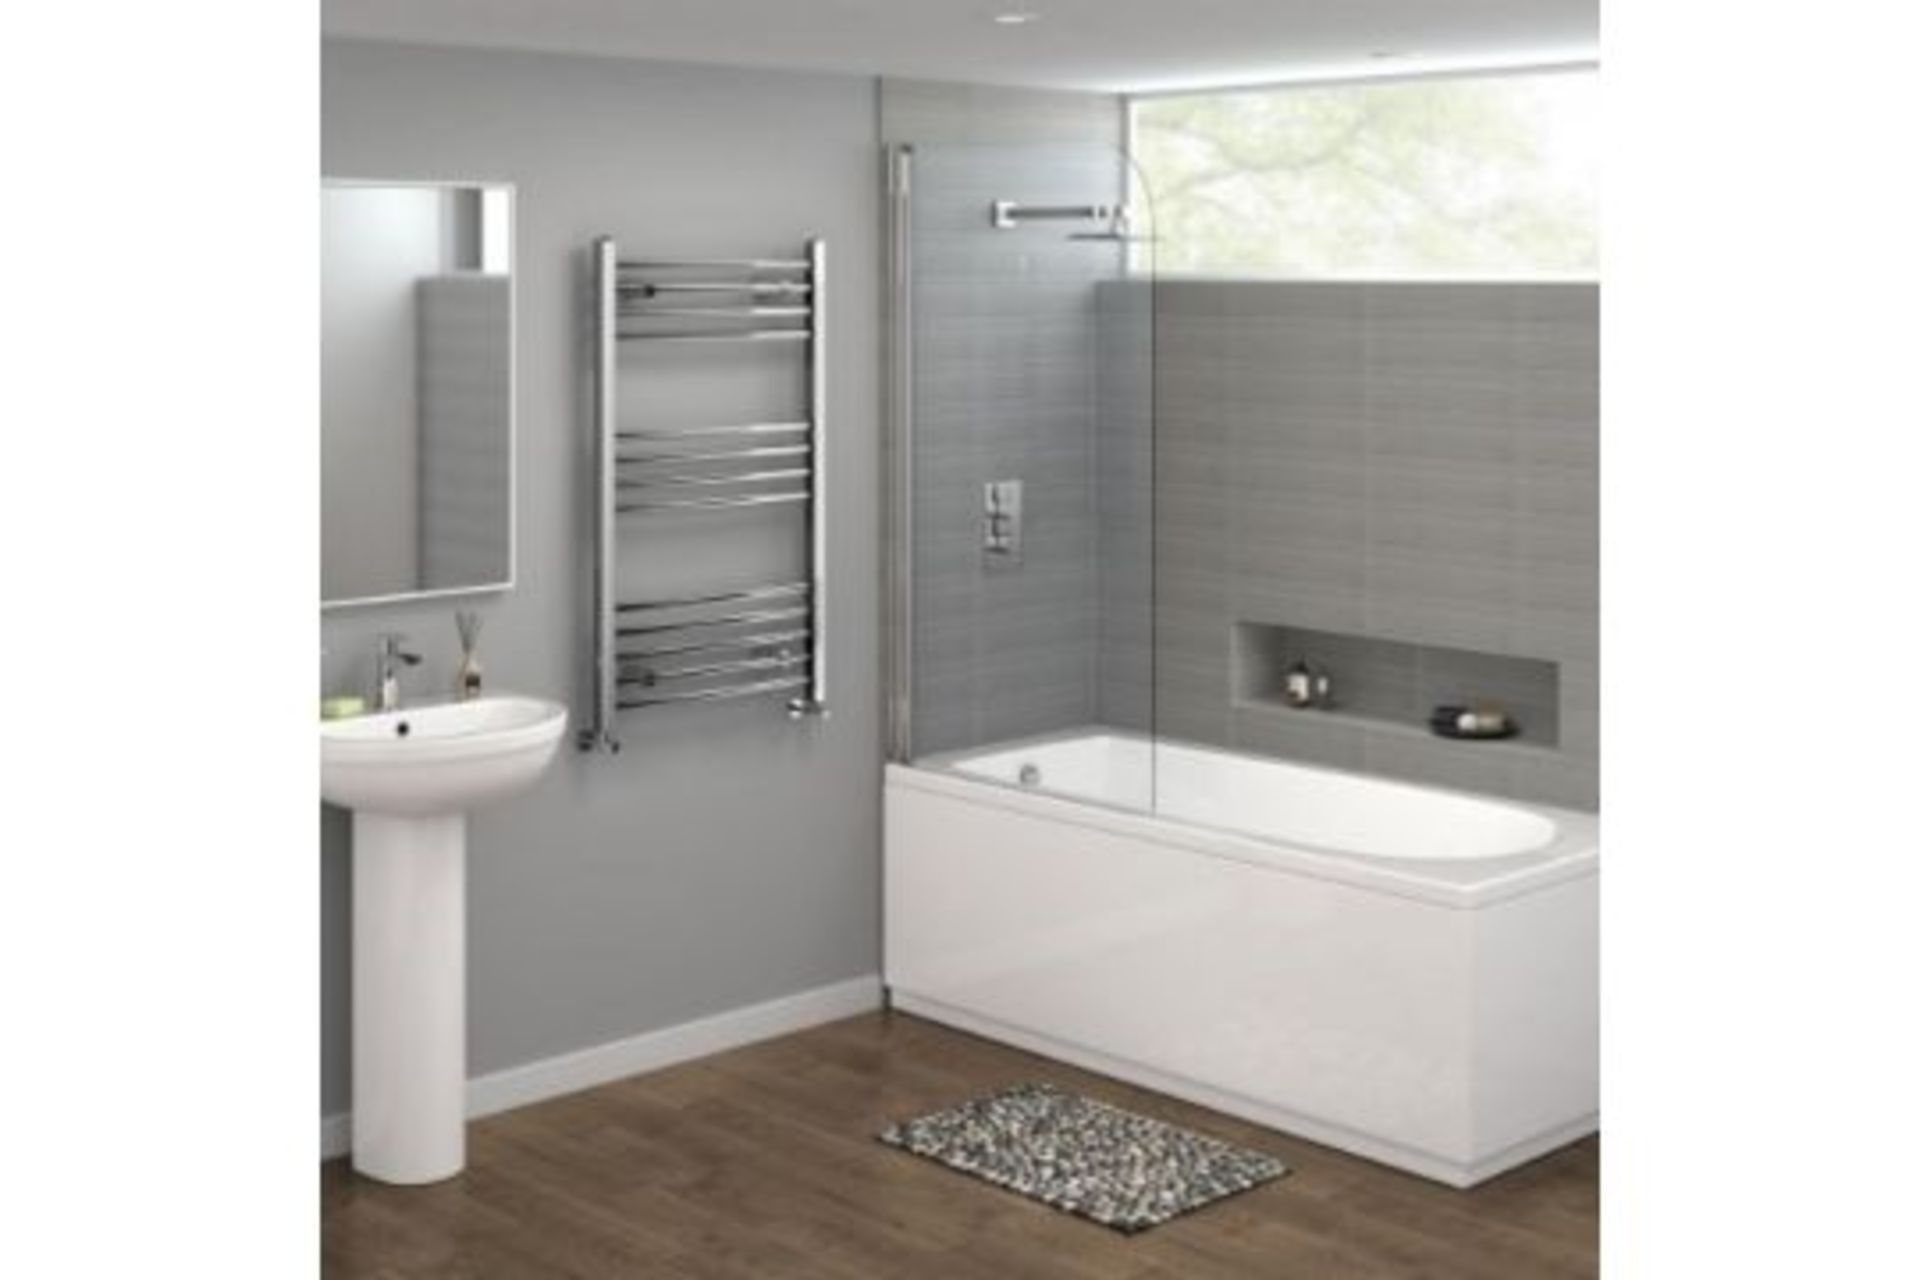 BRAND NEW BOXED 1200x500mm - 20mm Tubes - RRP £219.99.Chrome Curved Rail Ladder Towel Radiator. - Image 2 of 2